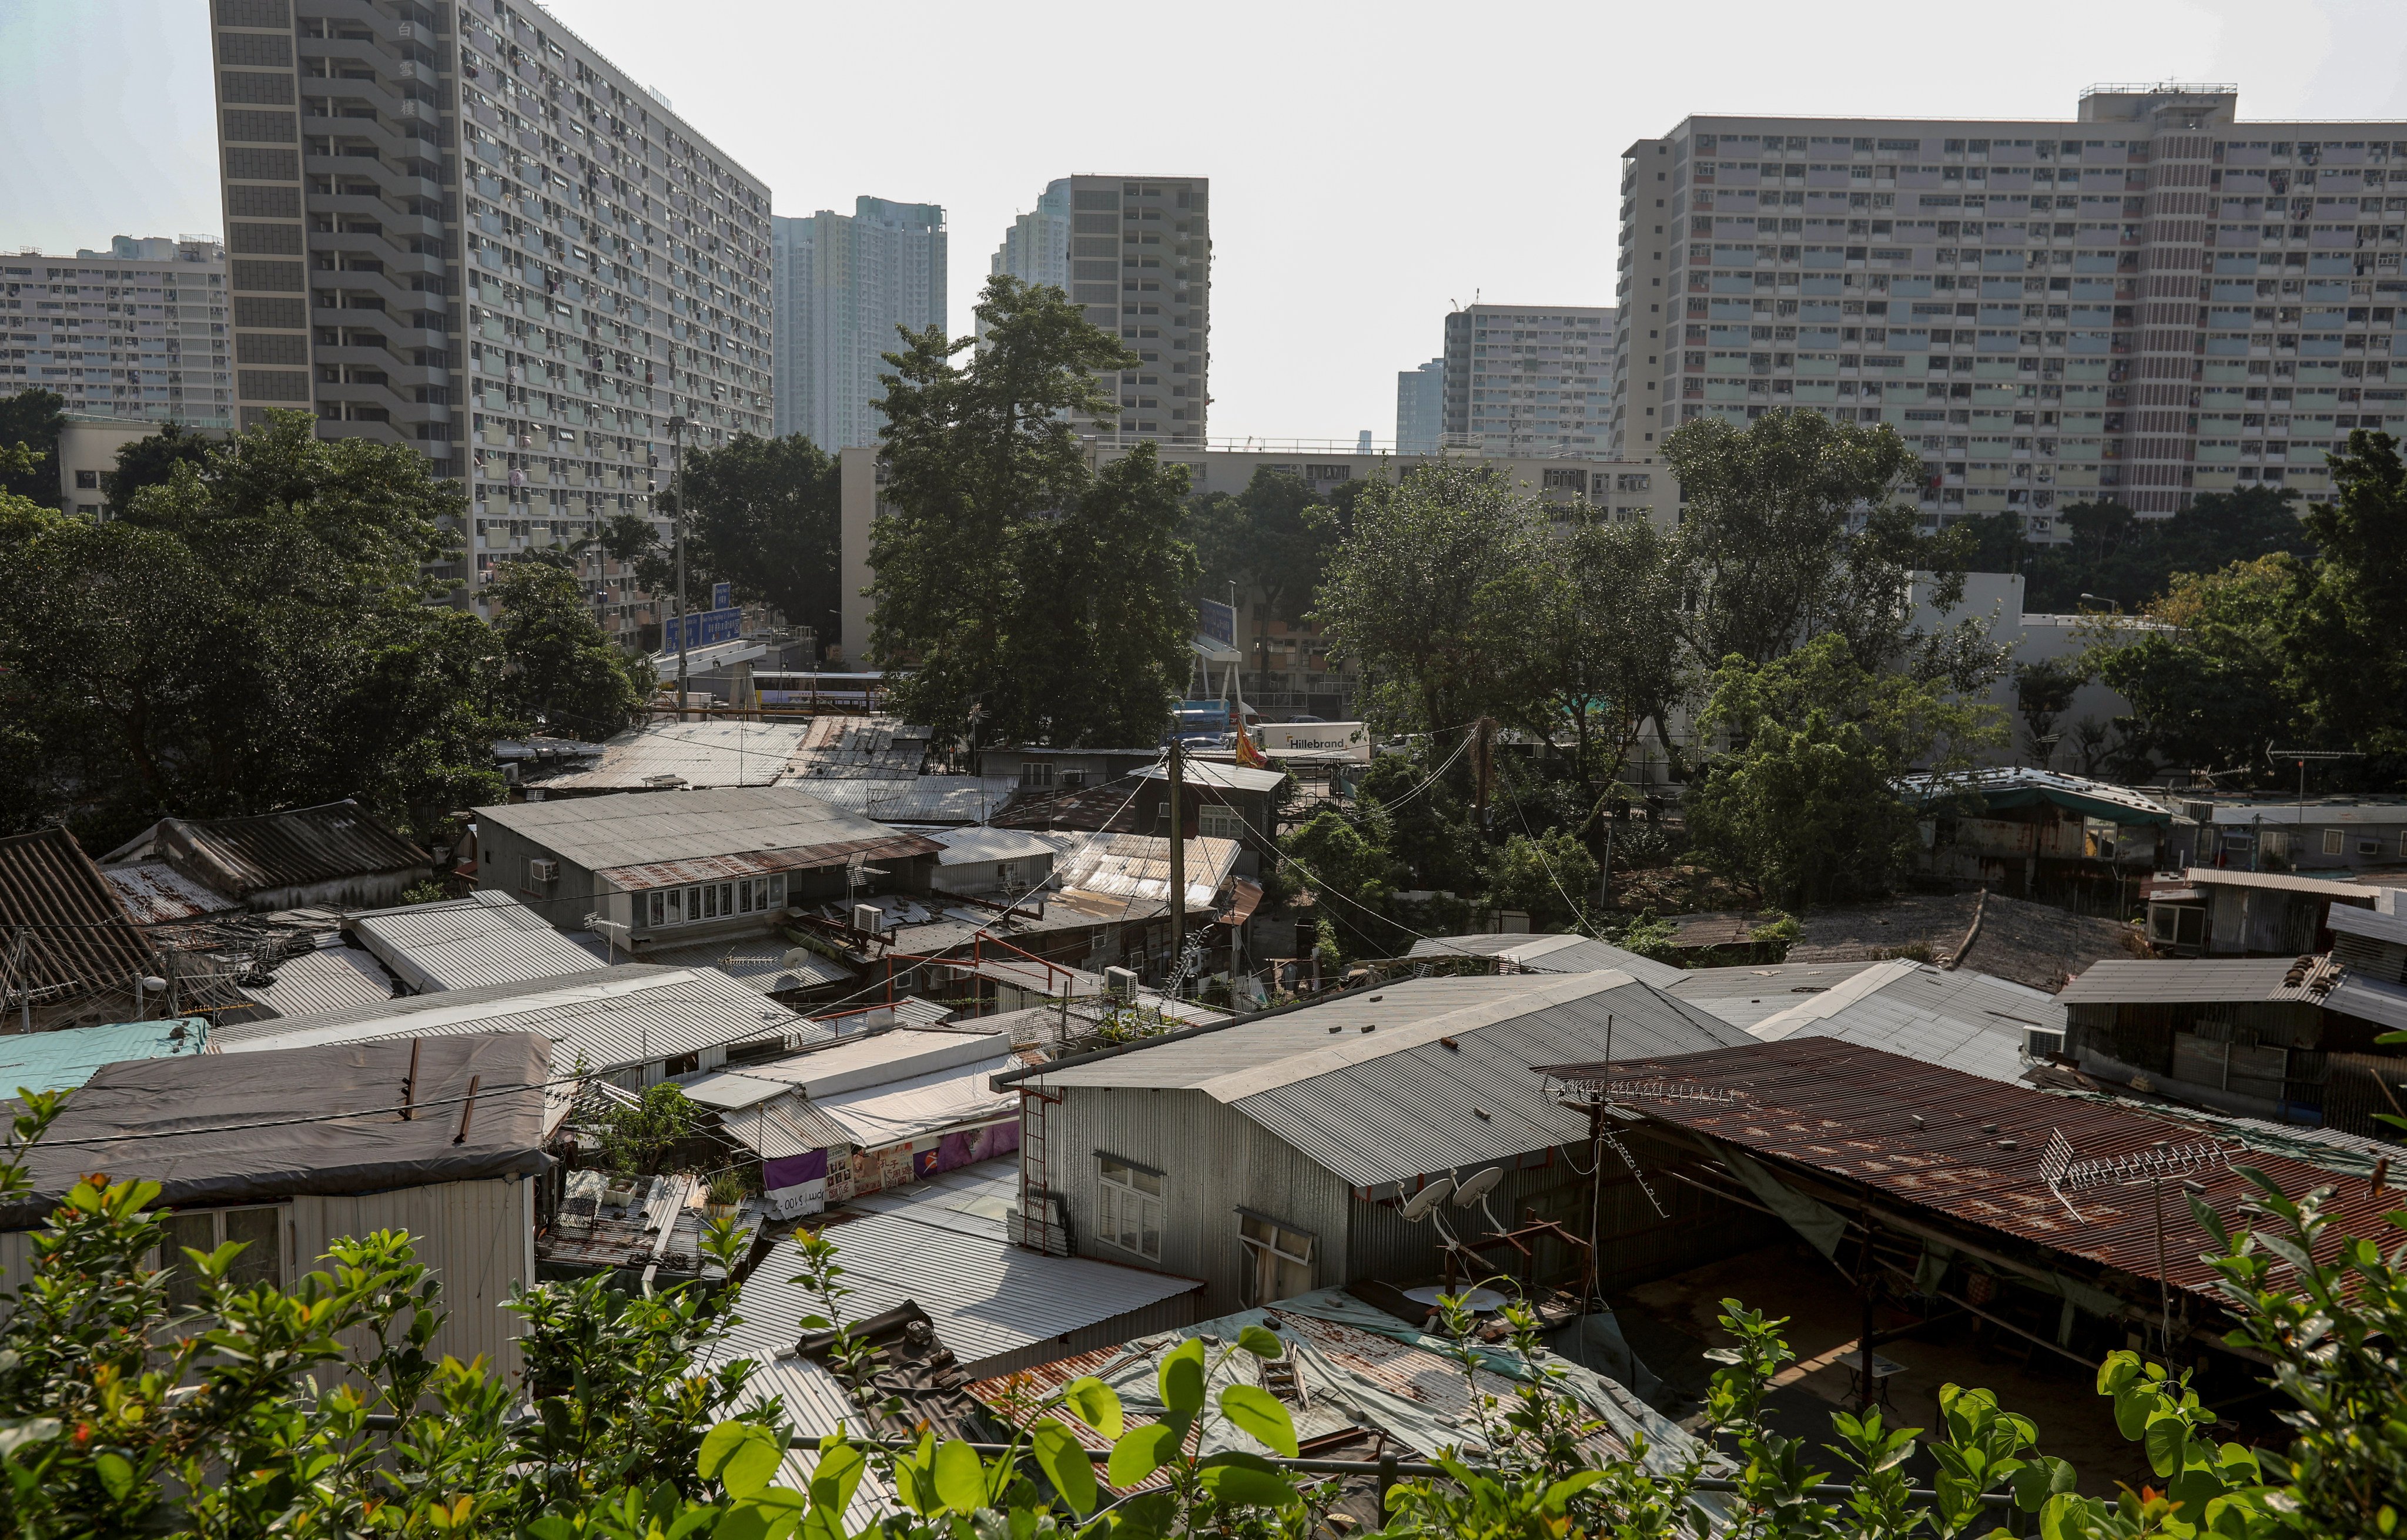 Ngau Chi Wan is home to about 900 people and 30 businesses. Photo: Nora Tam